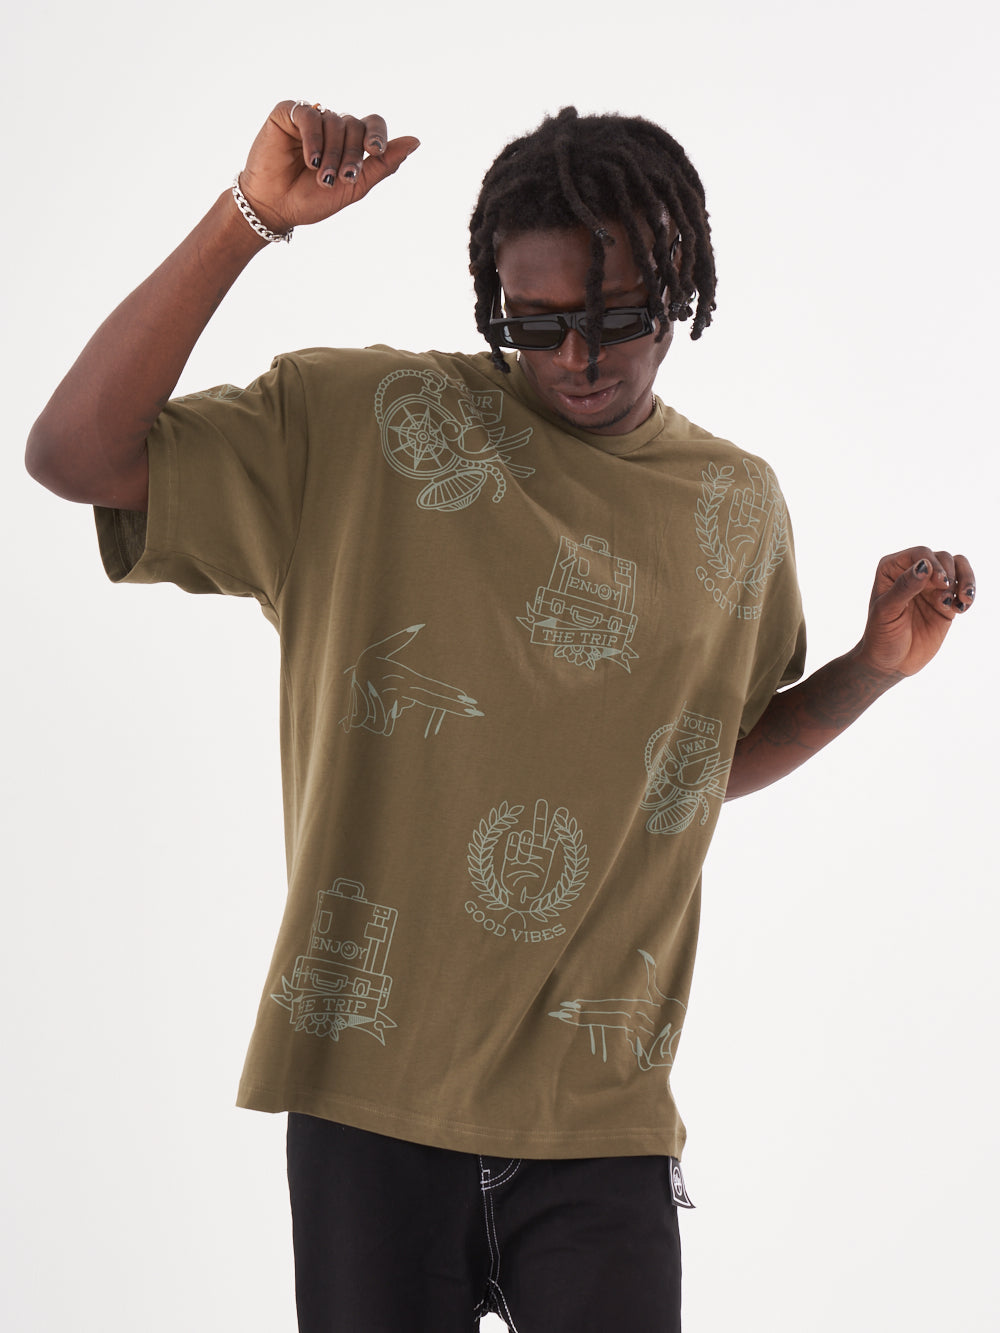 A man wearing an olive color VICTORY oversized t-shirt by Sernes Streetwear